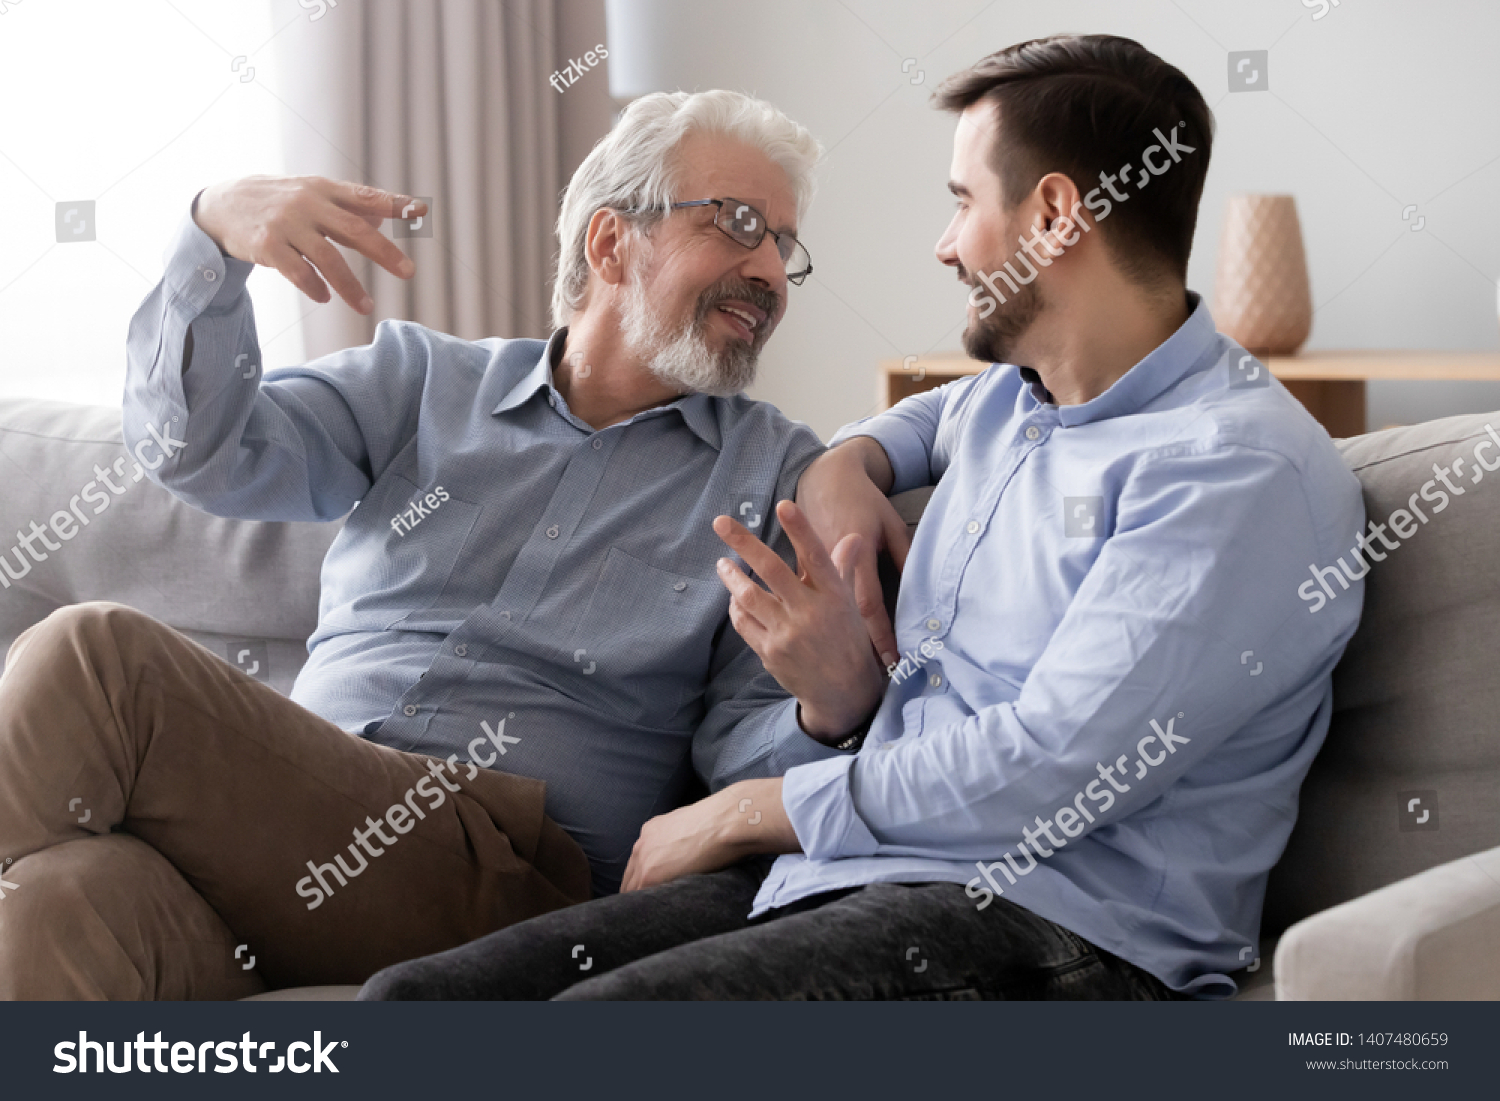 Smiling senior father sit on couch talk chat with millennial son spend time at home together, young man relax with elderly dad speak share thoughts have fun resting together on sofa in living room #1407480659